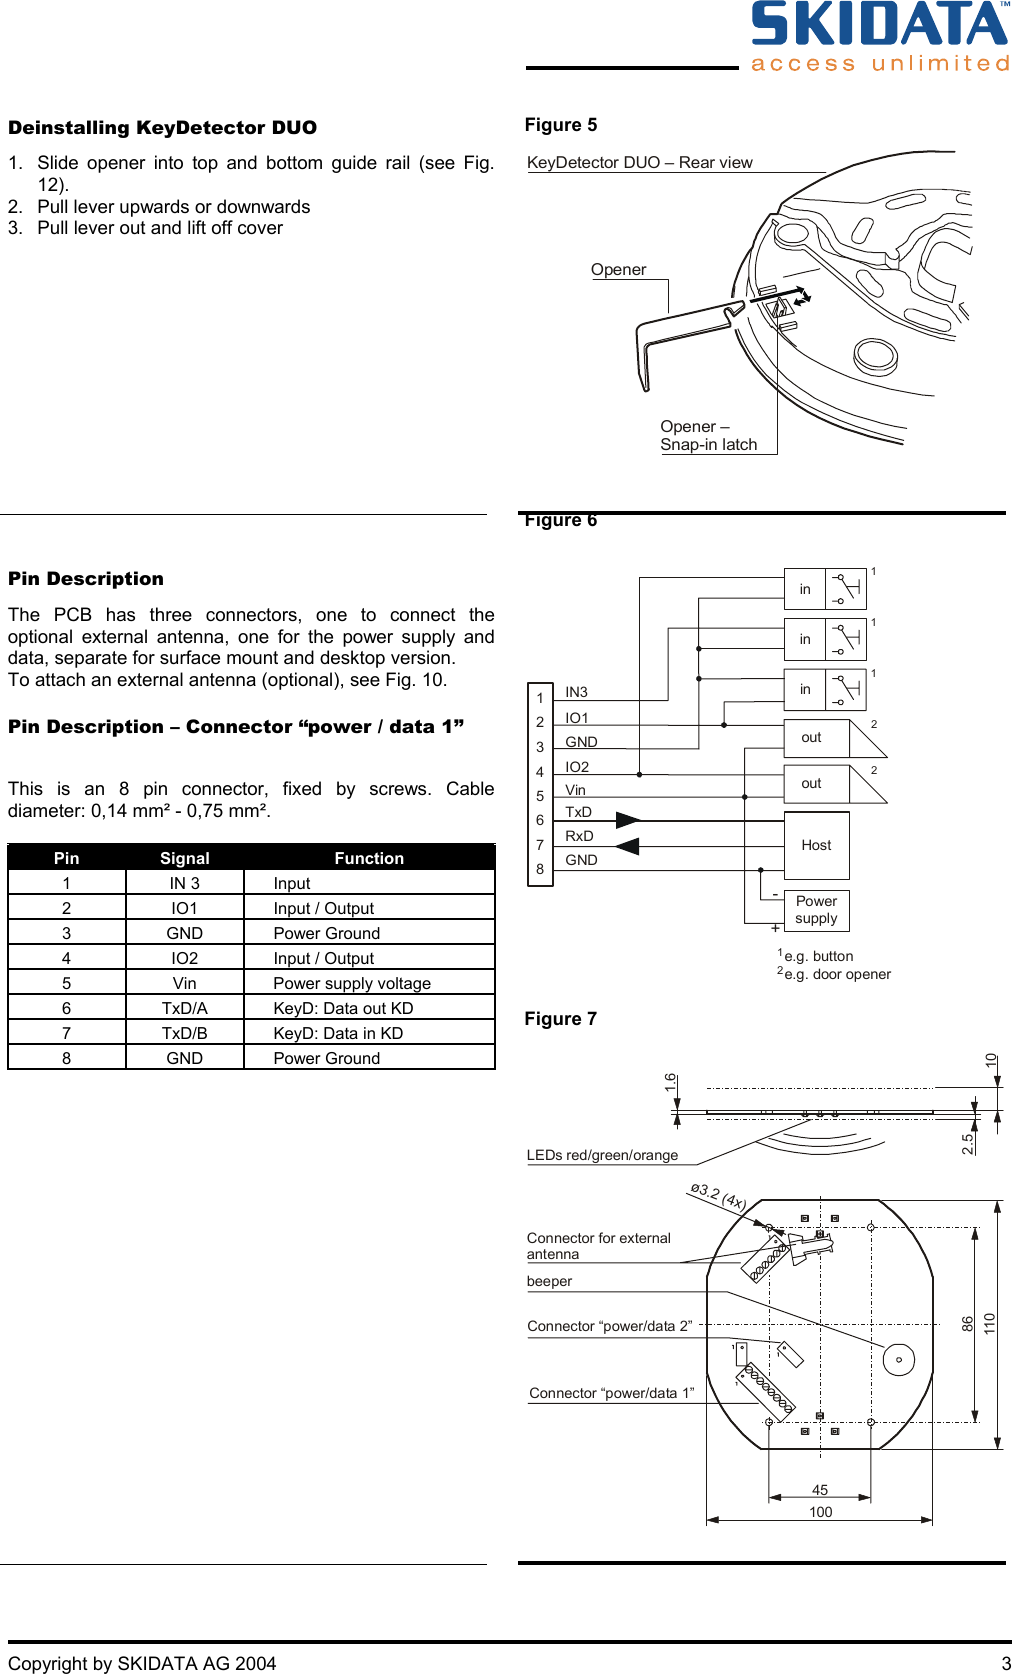  Copyright by SKIDATA AG 2004  3 Deinstalling KeyDetector DUO 1.  Slide opener into top and bottom guide rail (see Fig. 12). 2.  Pull lever upwards or downwards 3.  Pull lever out and lift off cover  Figure 5 KeyDetector DUO – Rear viewOpenerOpener –Snap-in latch  Figure 6  Pin Description  The PCB has three connectors, one to connect the optional external antenna, one for the power supply and data, separate for surface mount and desktop version. To attach an external antenna (optional), see Fig. 10.  Pin Description – Connector “power / data 1”  This is an 8 pin connector, fixed by screws. Cable diameter: 0,14 mm² - 0,75 mm².  Pin  Signal  Function 1  IN 3    Input  2  IO1    Input / Output 3 GND  Power Ground 4  IO2    Input / Output 5  Vin    Power supply voltage 6  TxD/A    KeyD: Data out KD 7  TxD/B    KeyD: Data in KD 8 GND  Power Ground                12345678IN3GNDIO1RxDGNDTxDIO2VinPowersupplyinin-+Host2211112e.g. buttone.g. door openeroutoutin  Figure 7  1.6ø3.2 (4x)86110 102.510045LEDs red/green/orangeConnector for externalantennabeeperConnector “power/data 2”Connector “power/data 1”    